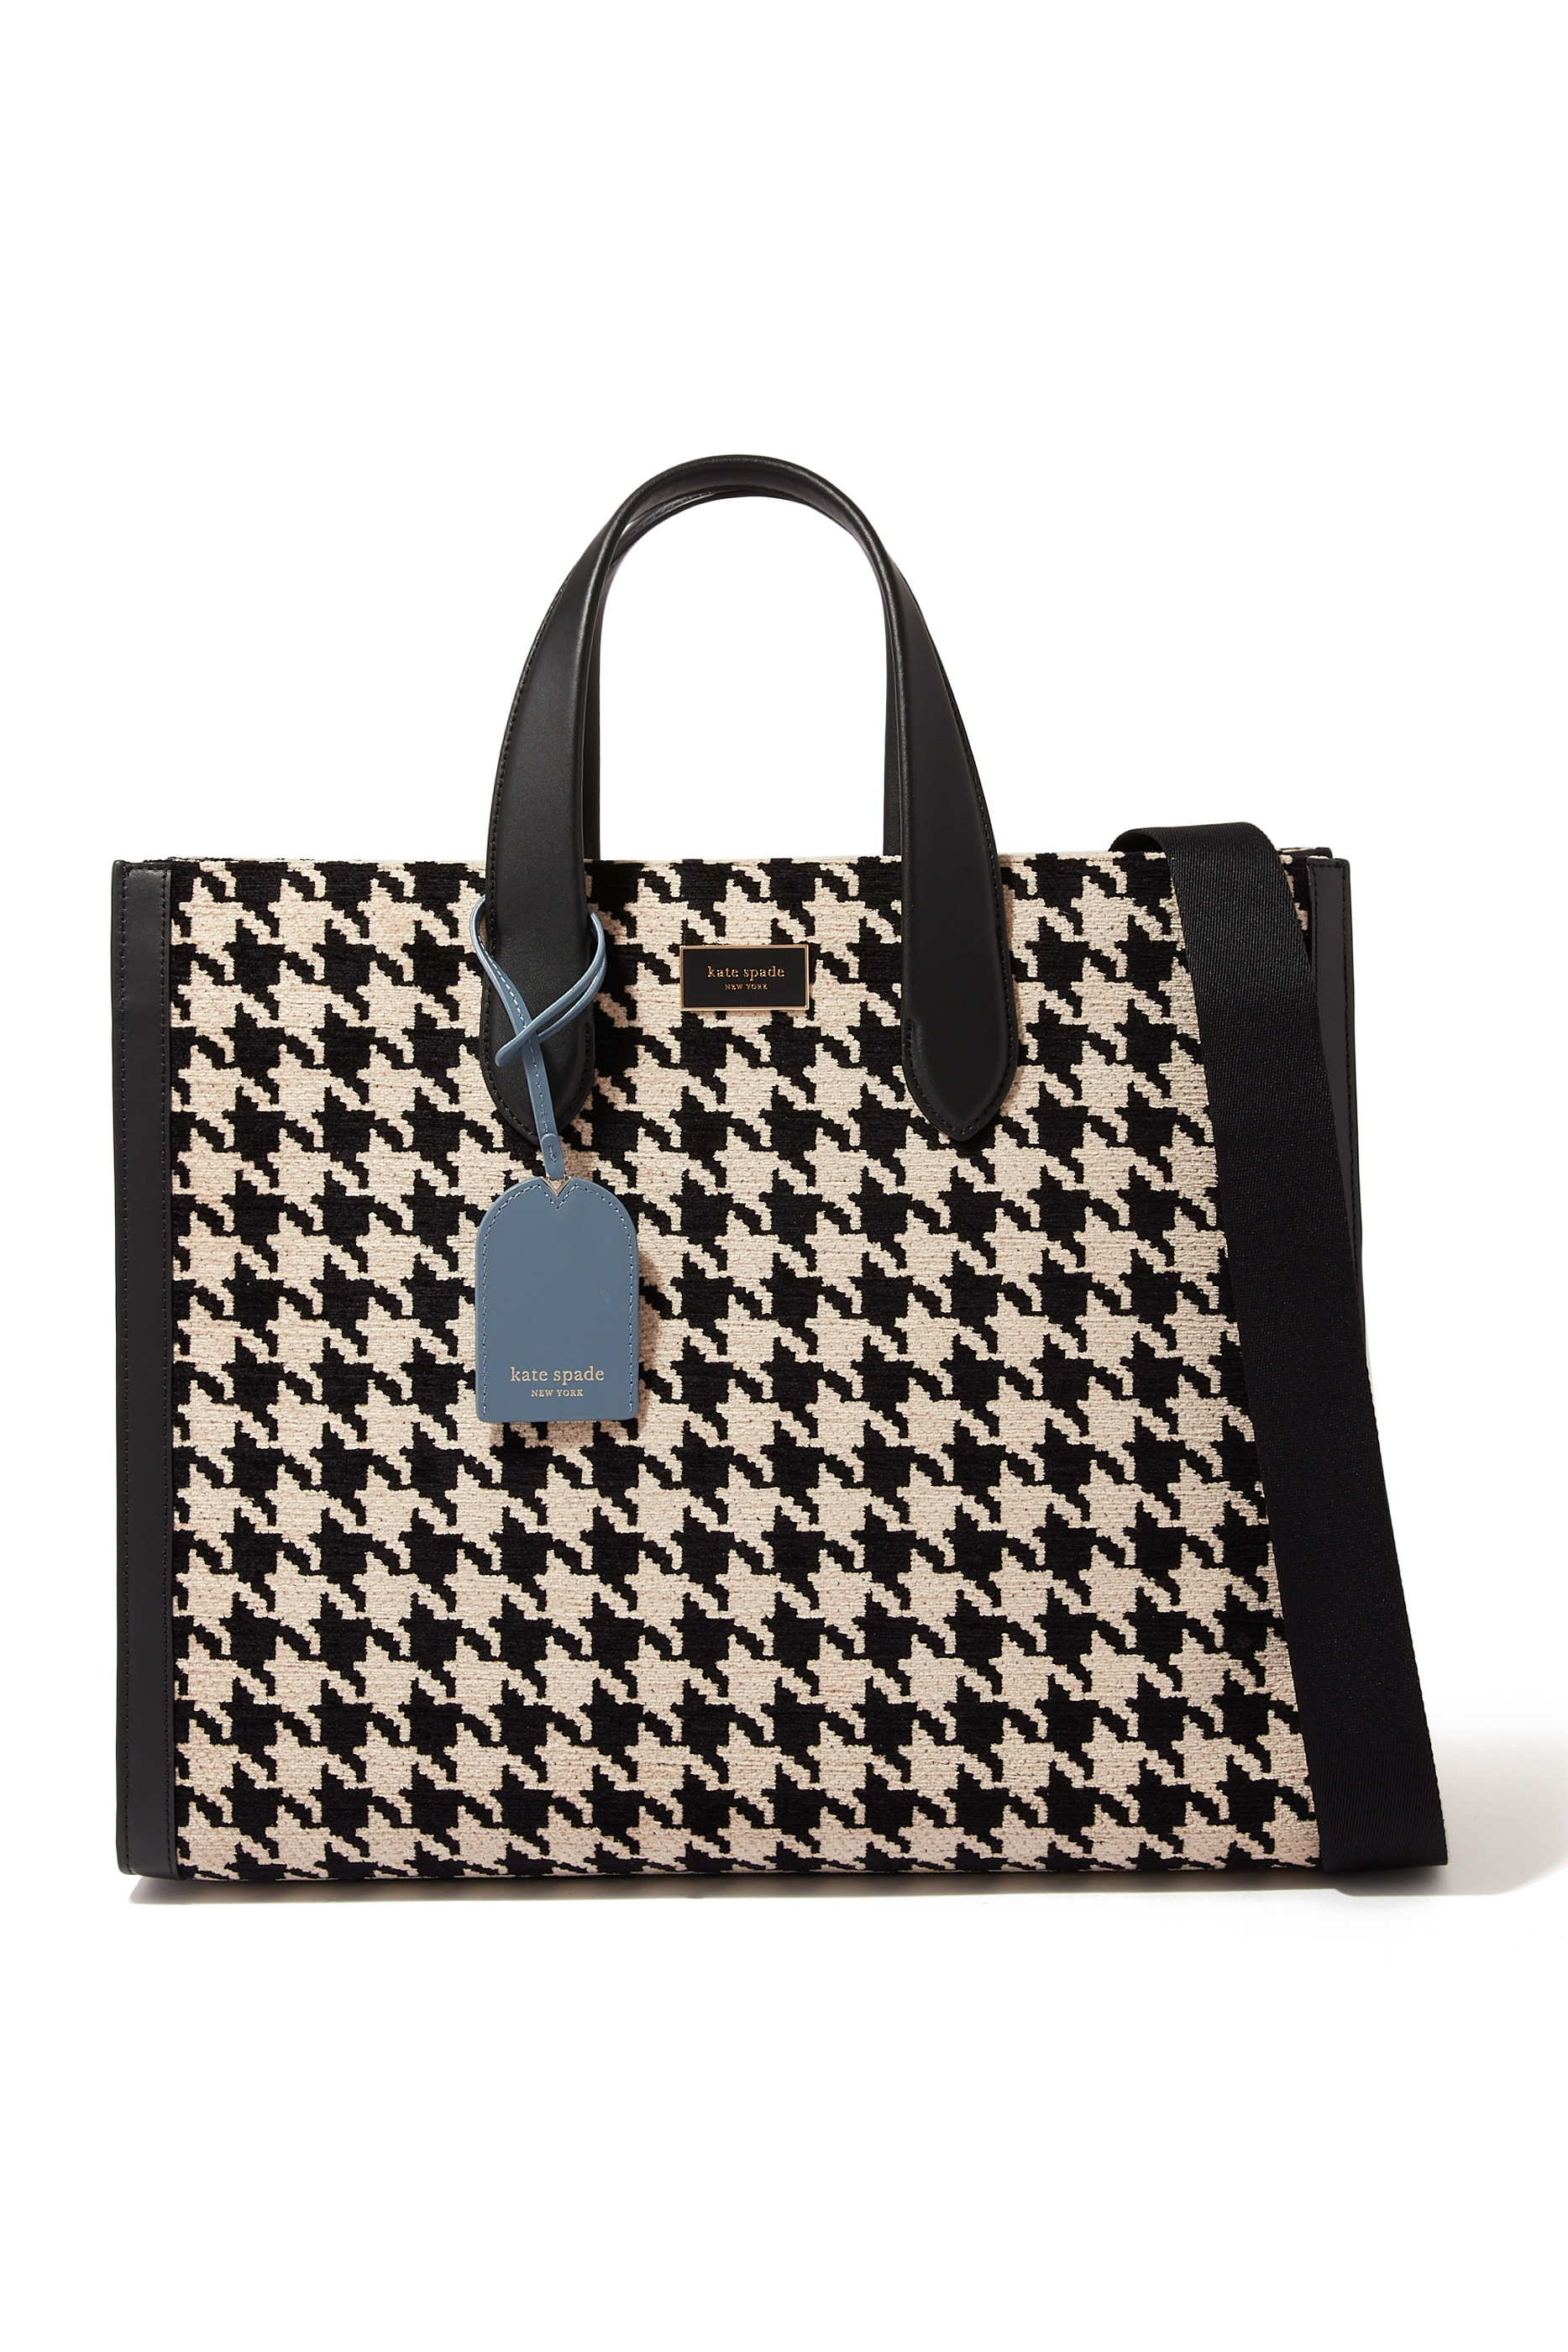 Buy Kate Spade Manhattan Houndstooth Large Tote Bag for Womens